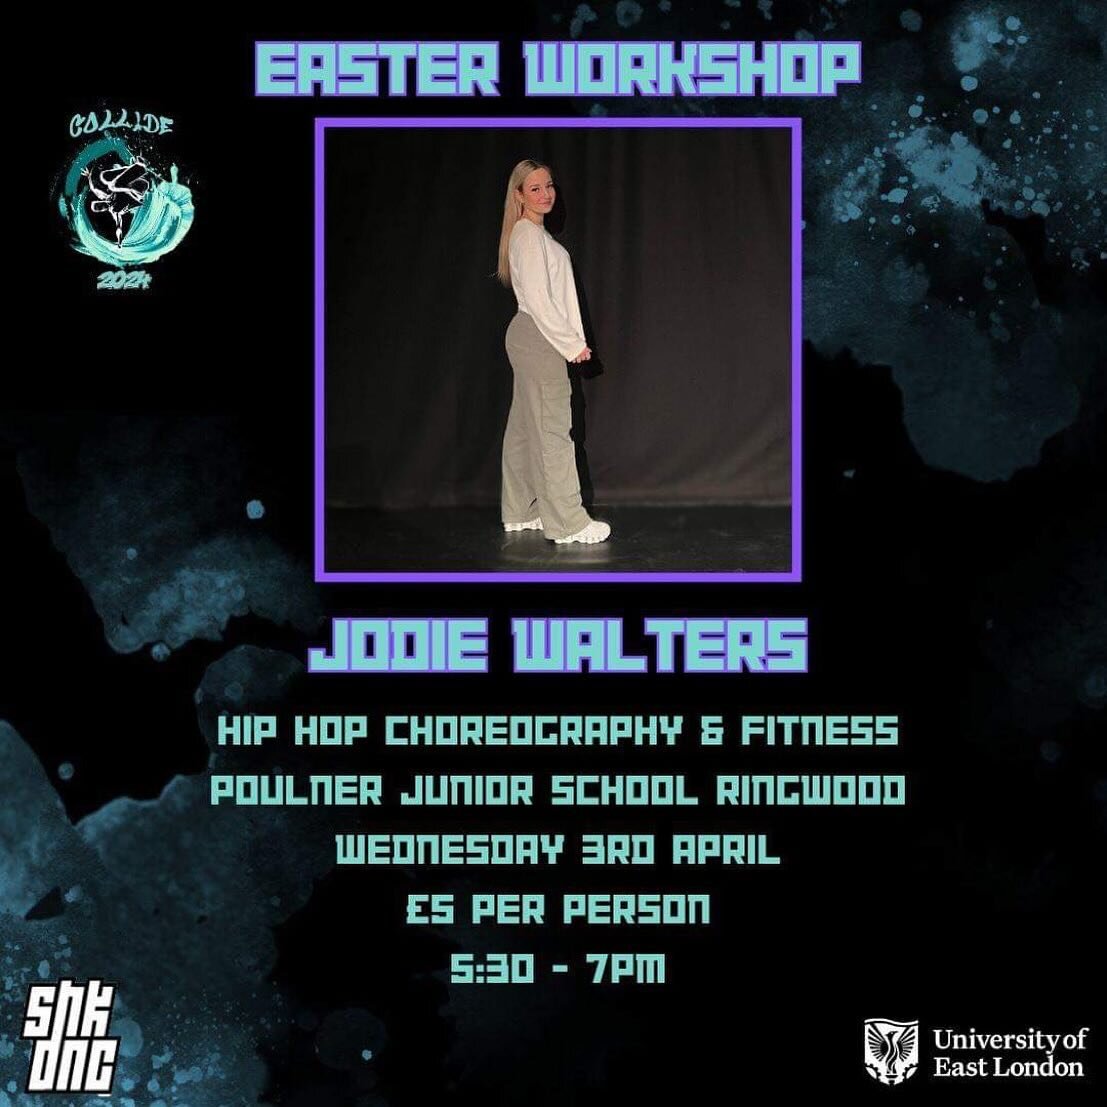 We hope everyone is having a great Easter weekend. Just a reminder our weekly classes are closed for the Easter holidays but we have a great workshop taking place Wednesday evening with Jodie&hellip;..

A much loved member of the Shake family, Jodie 